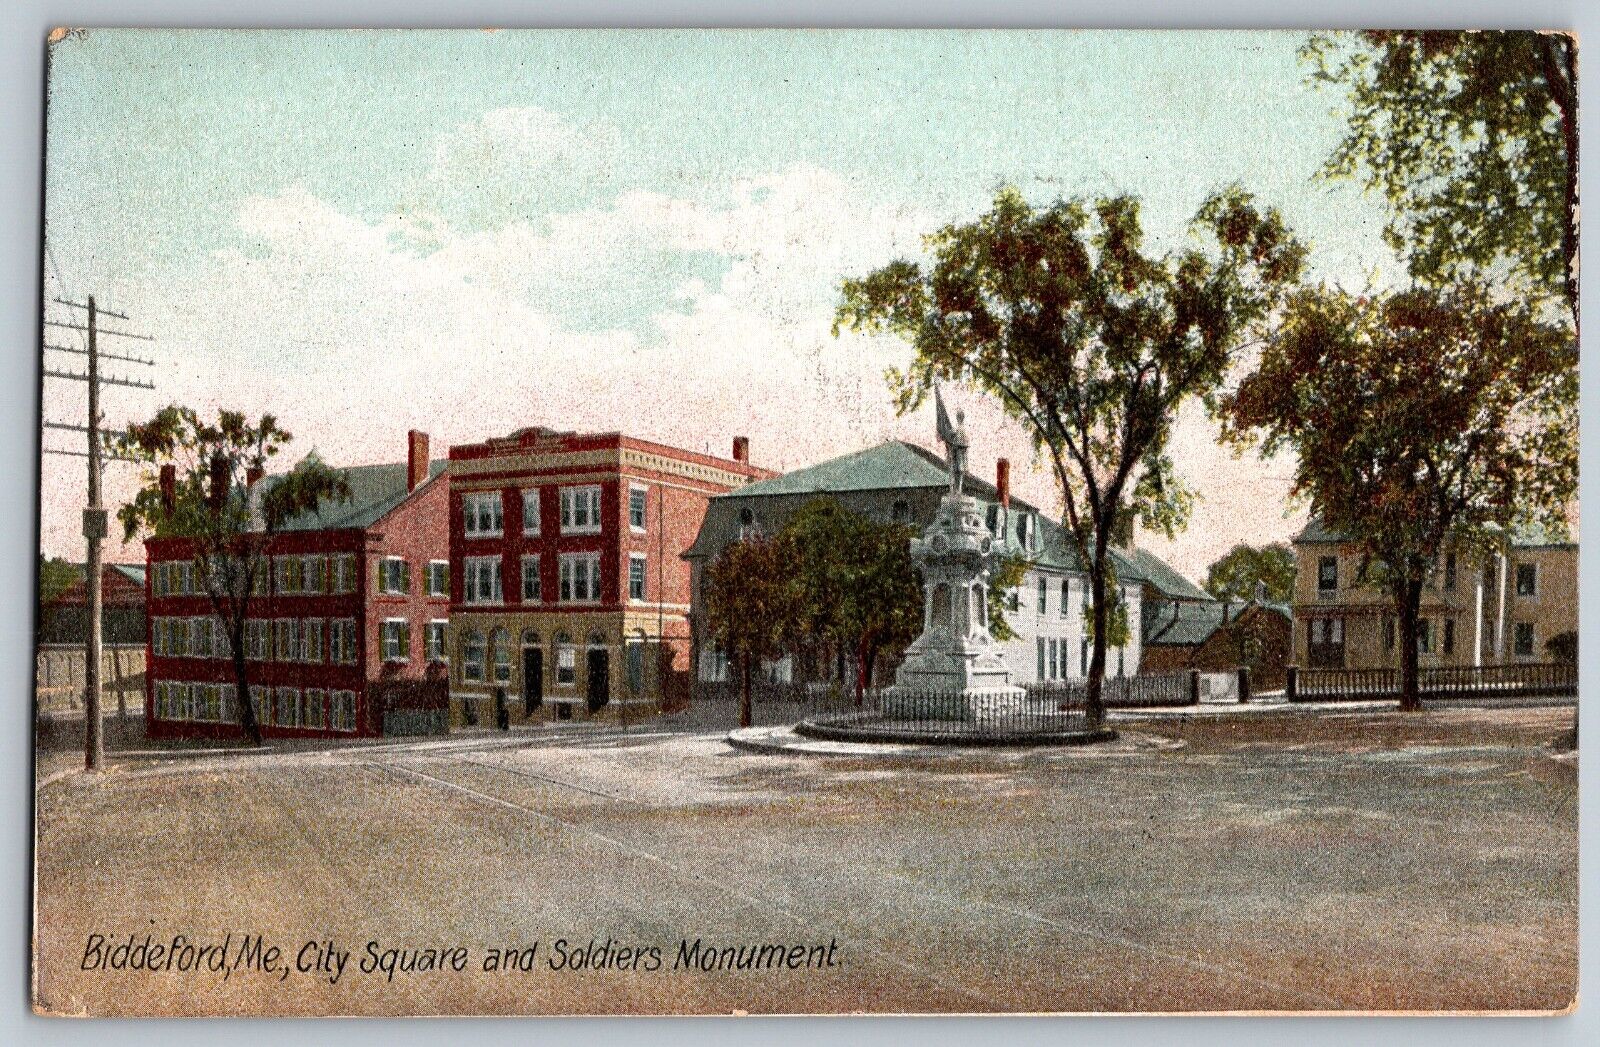 Biddeford, Maine - City Square & Soldier\'s Monument - Vintage Postcard - Posted